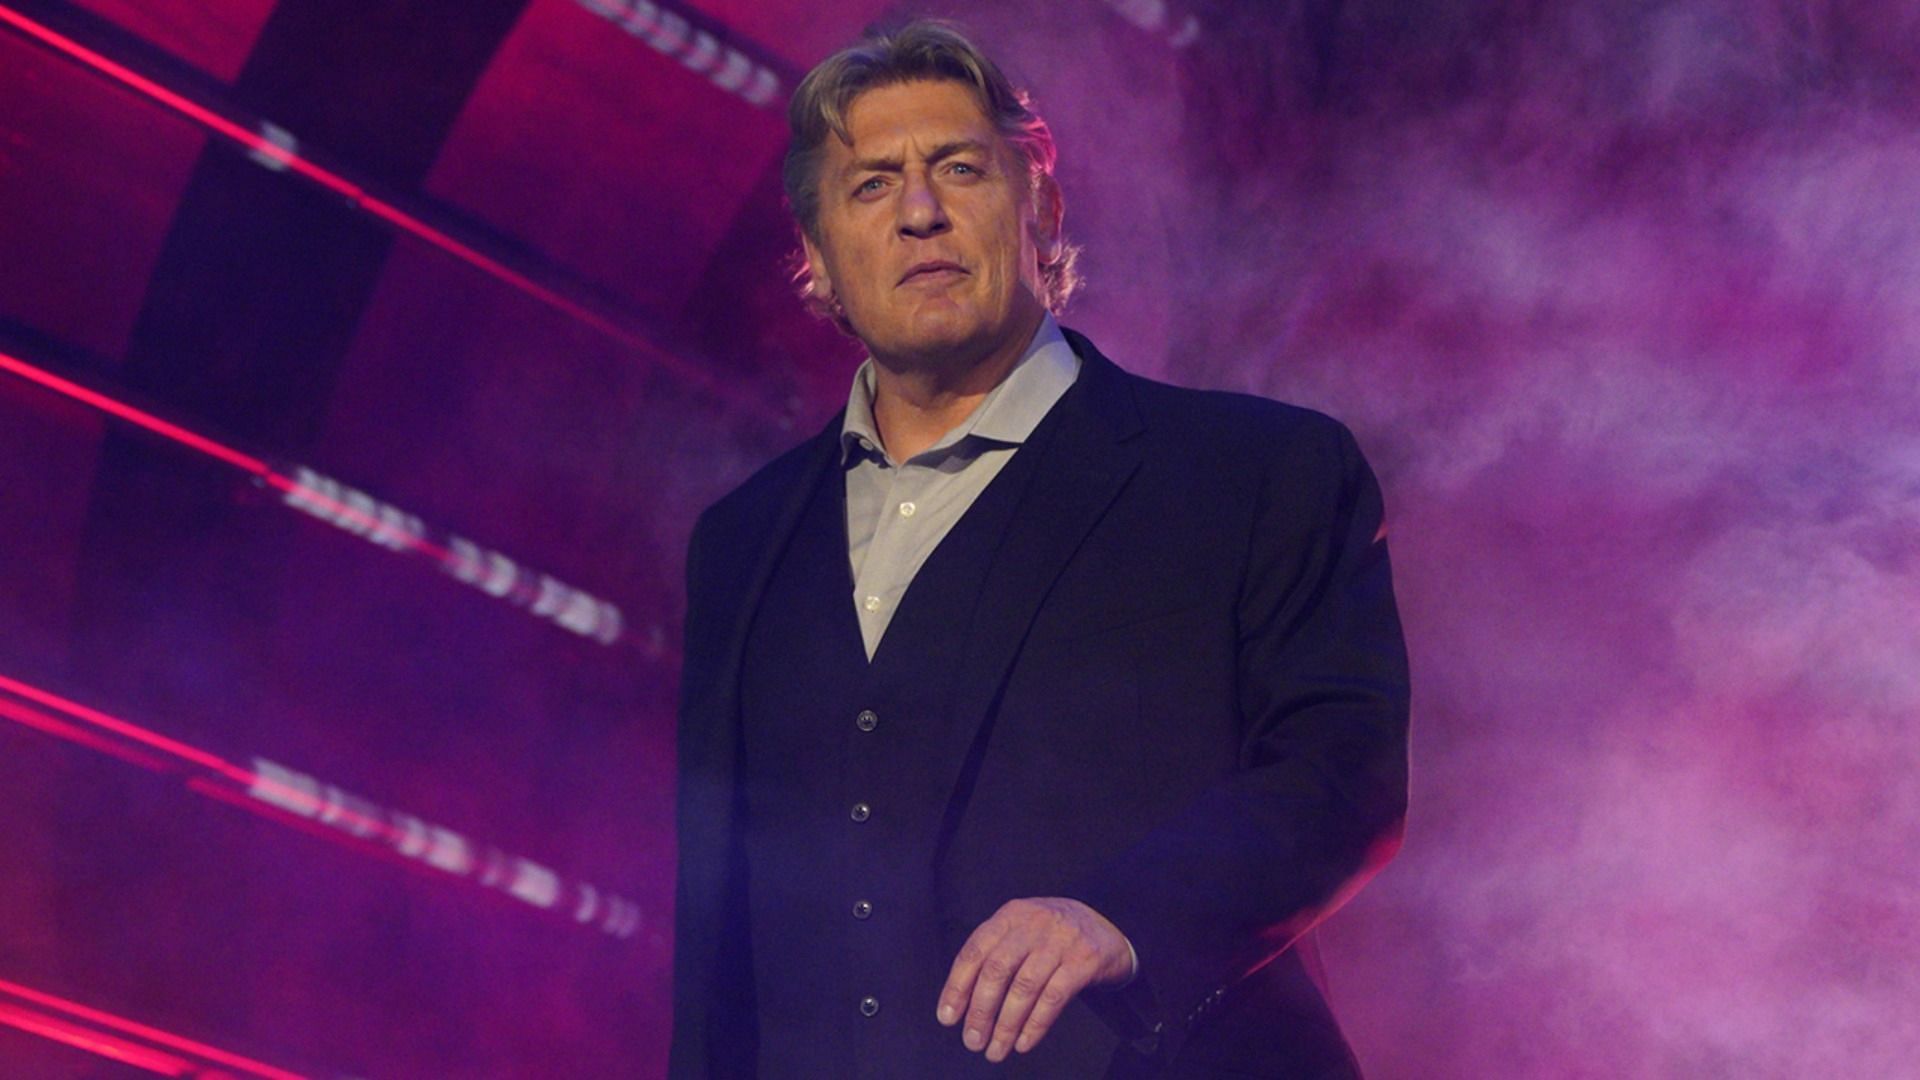 William Regal has officially parted ways with AEW.